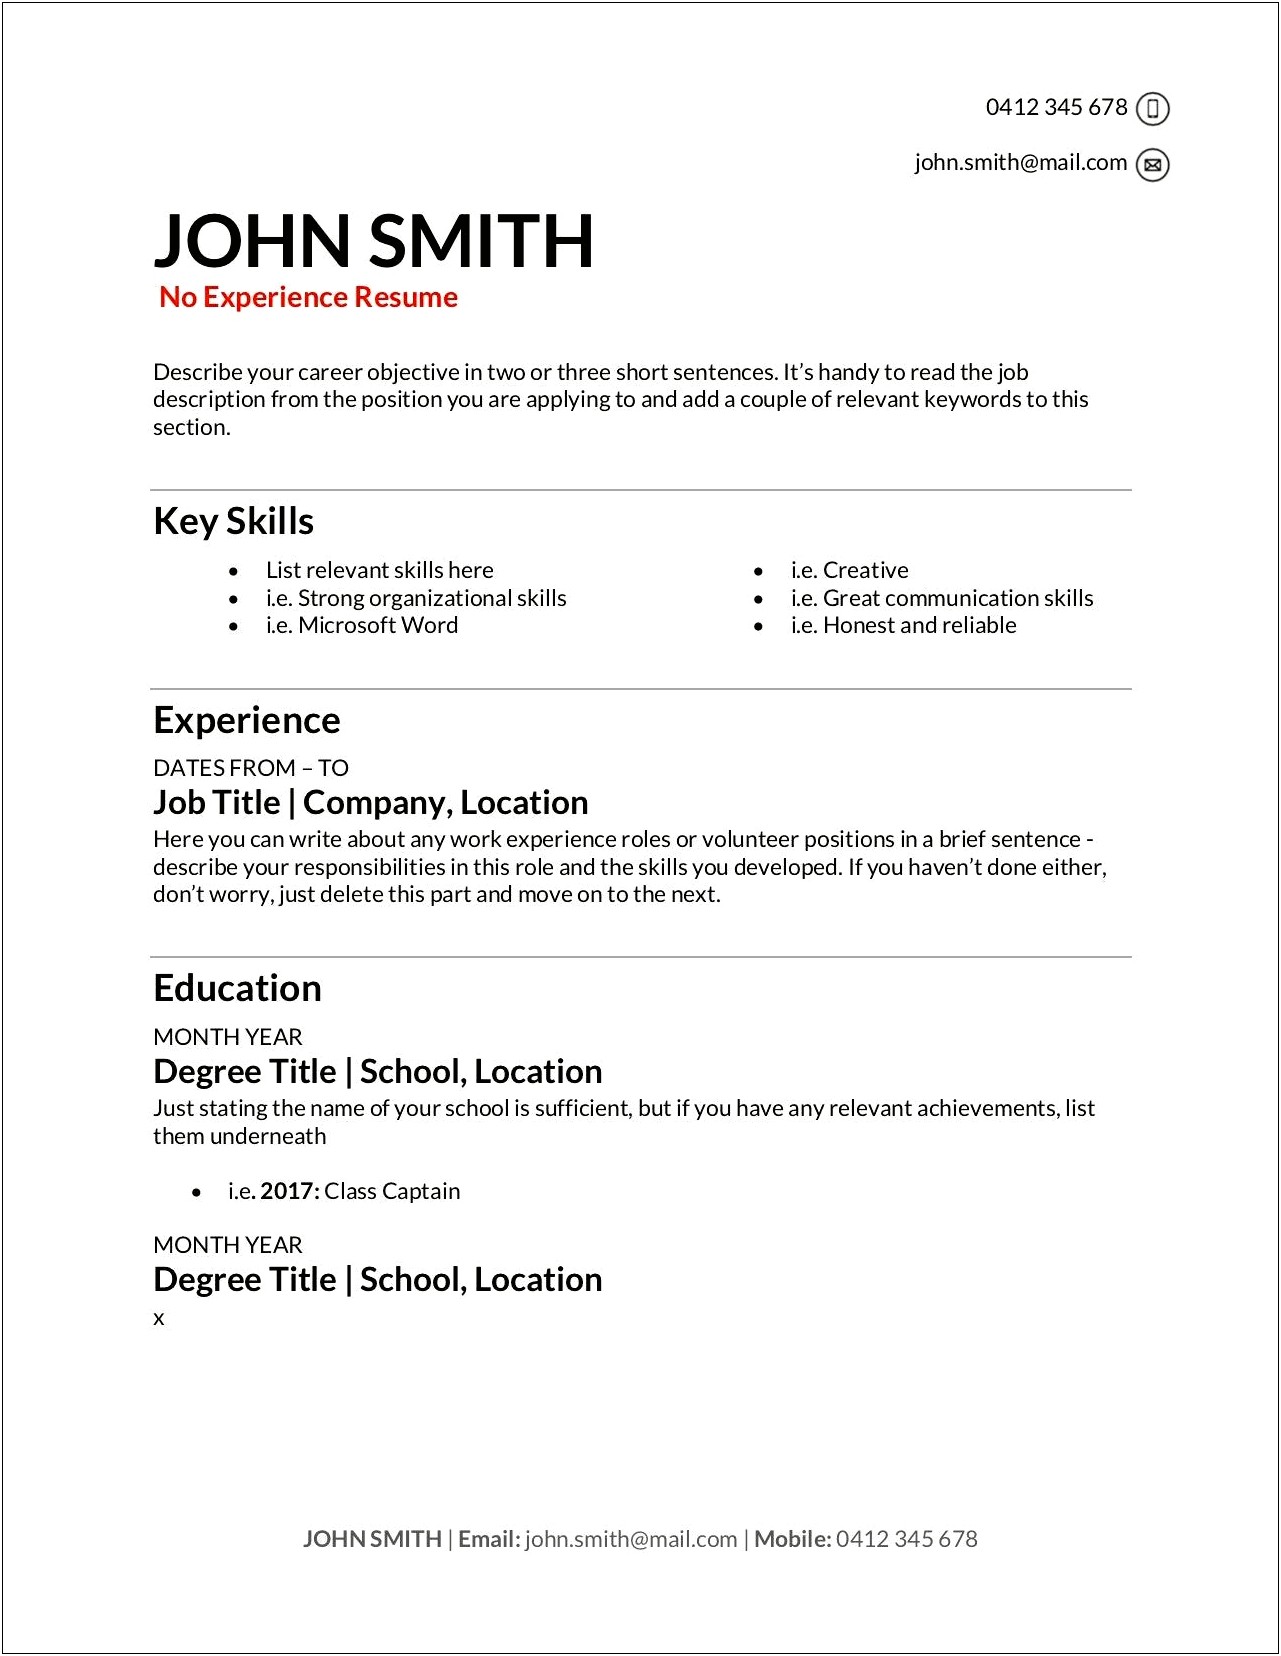 Resume Sample With No Experience In Working